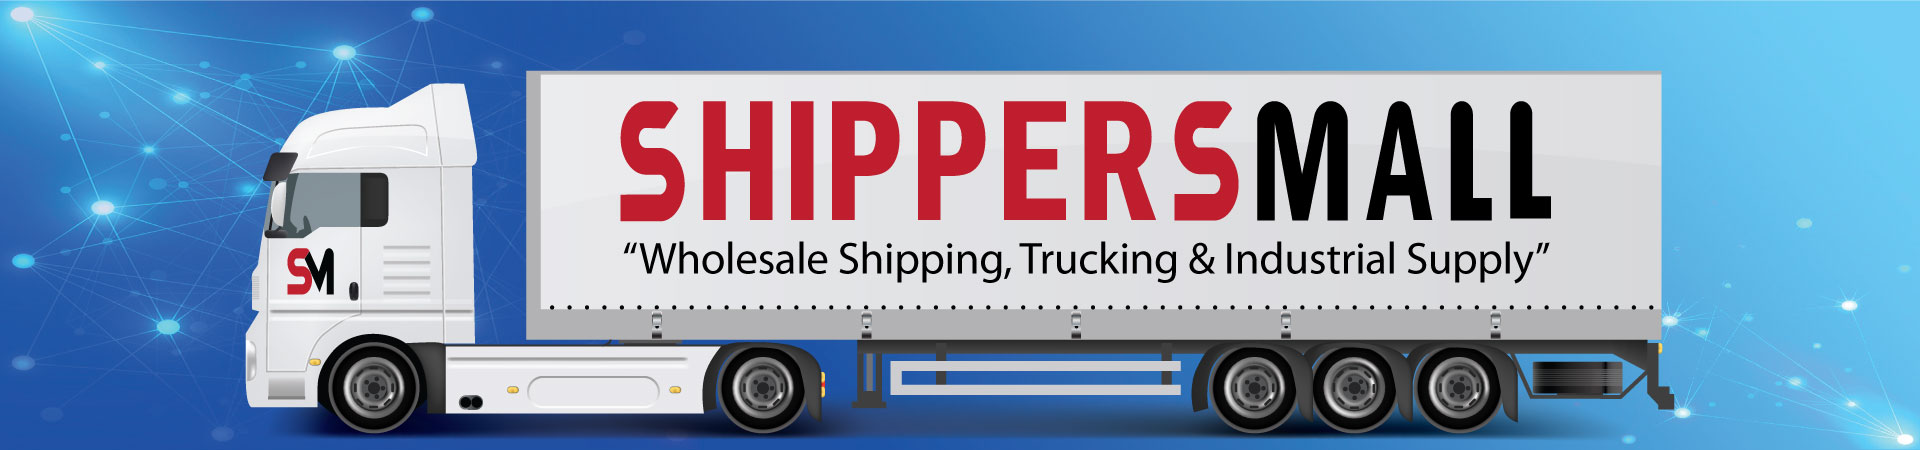 Shippers Mall - Wholesale Shipping, Trucking and Industrial Supply